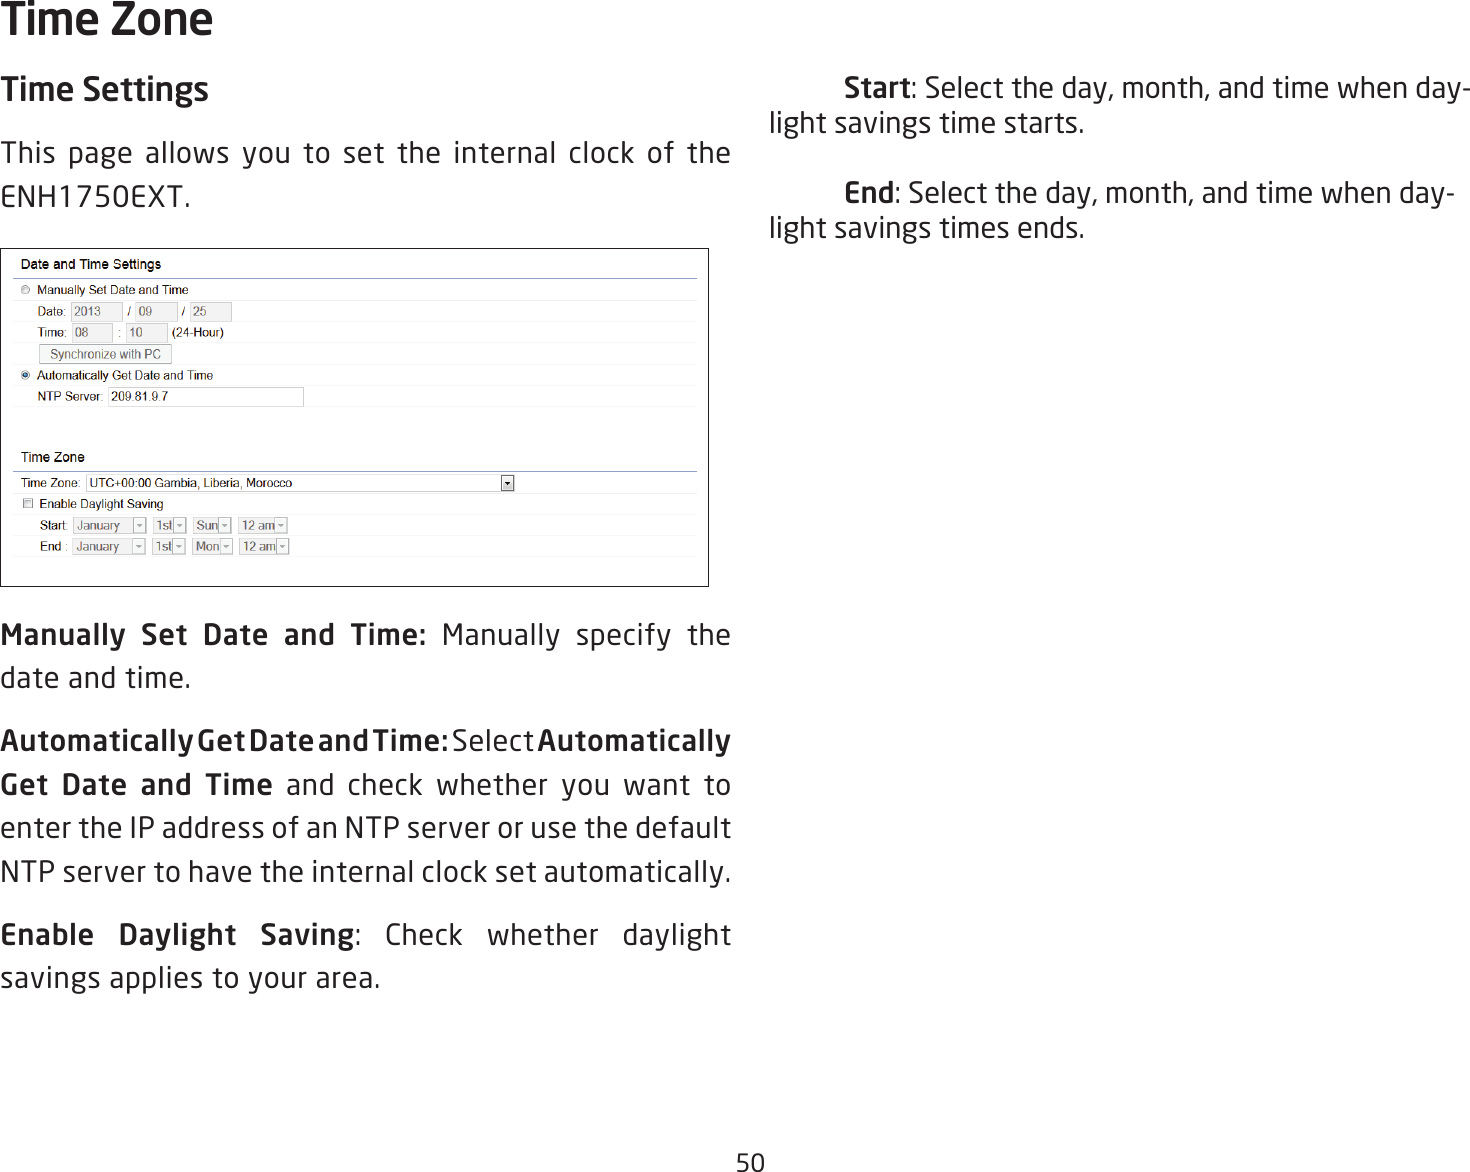 50Time SettingsThis page allows you to set the internal clock of the ENH1750EXT.Manually  Set  Date  and  Time:  Manually specify the date and time.Automatically Get Date and Time: Select Automatically Get  Date  and  Time and check whether you want to enter the IP address of an NTP server or use the default NTP server to have the internal clock set automatically.Enable Daylight Saving: Check whether daylight savings applies to your area. Start: Select the day, month, and time when day-light savings time starts. End: Select the day, month, and time when day-light savings times ends.Time Zone